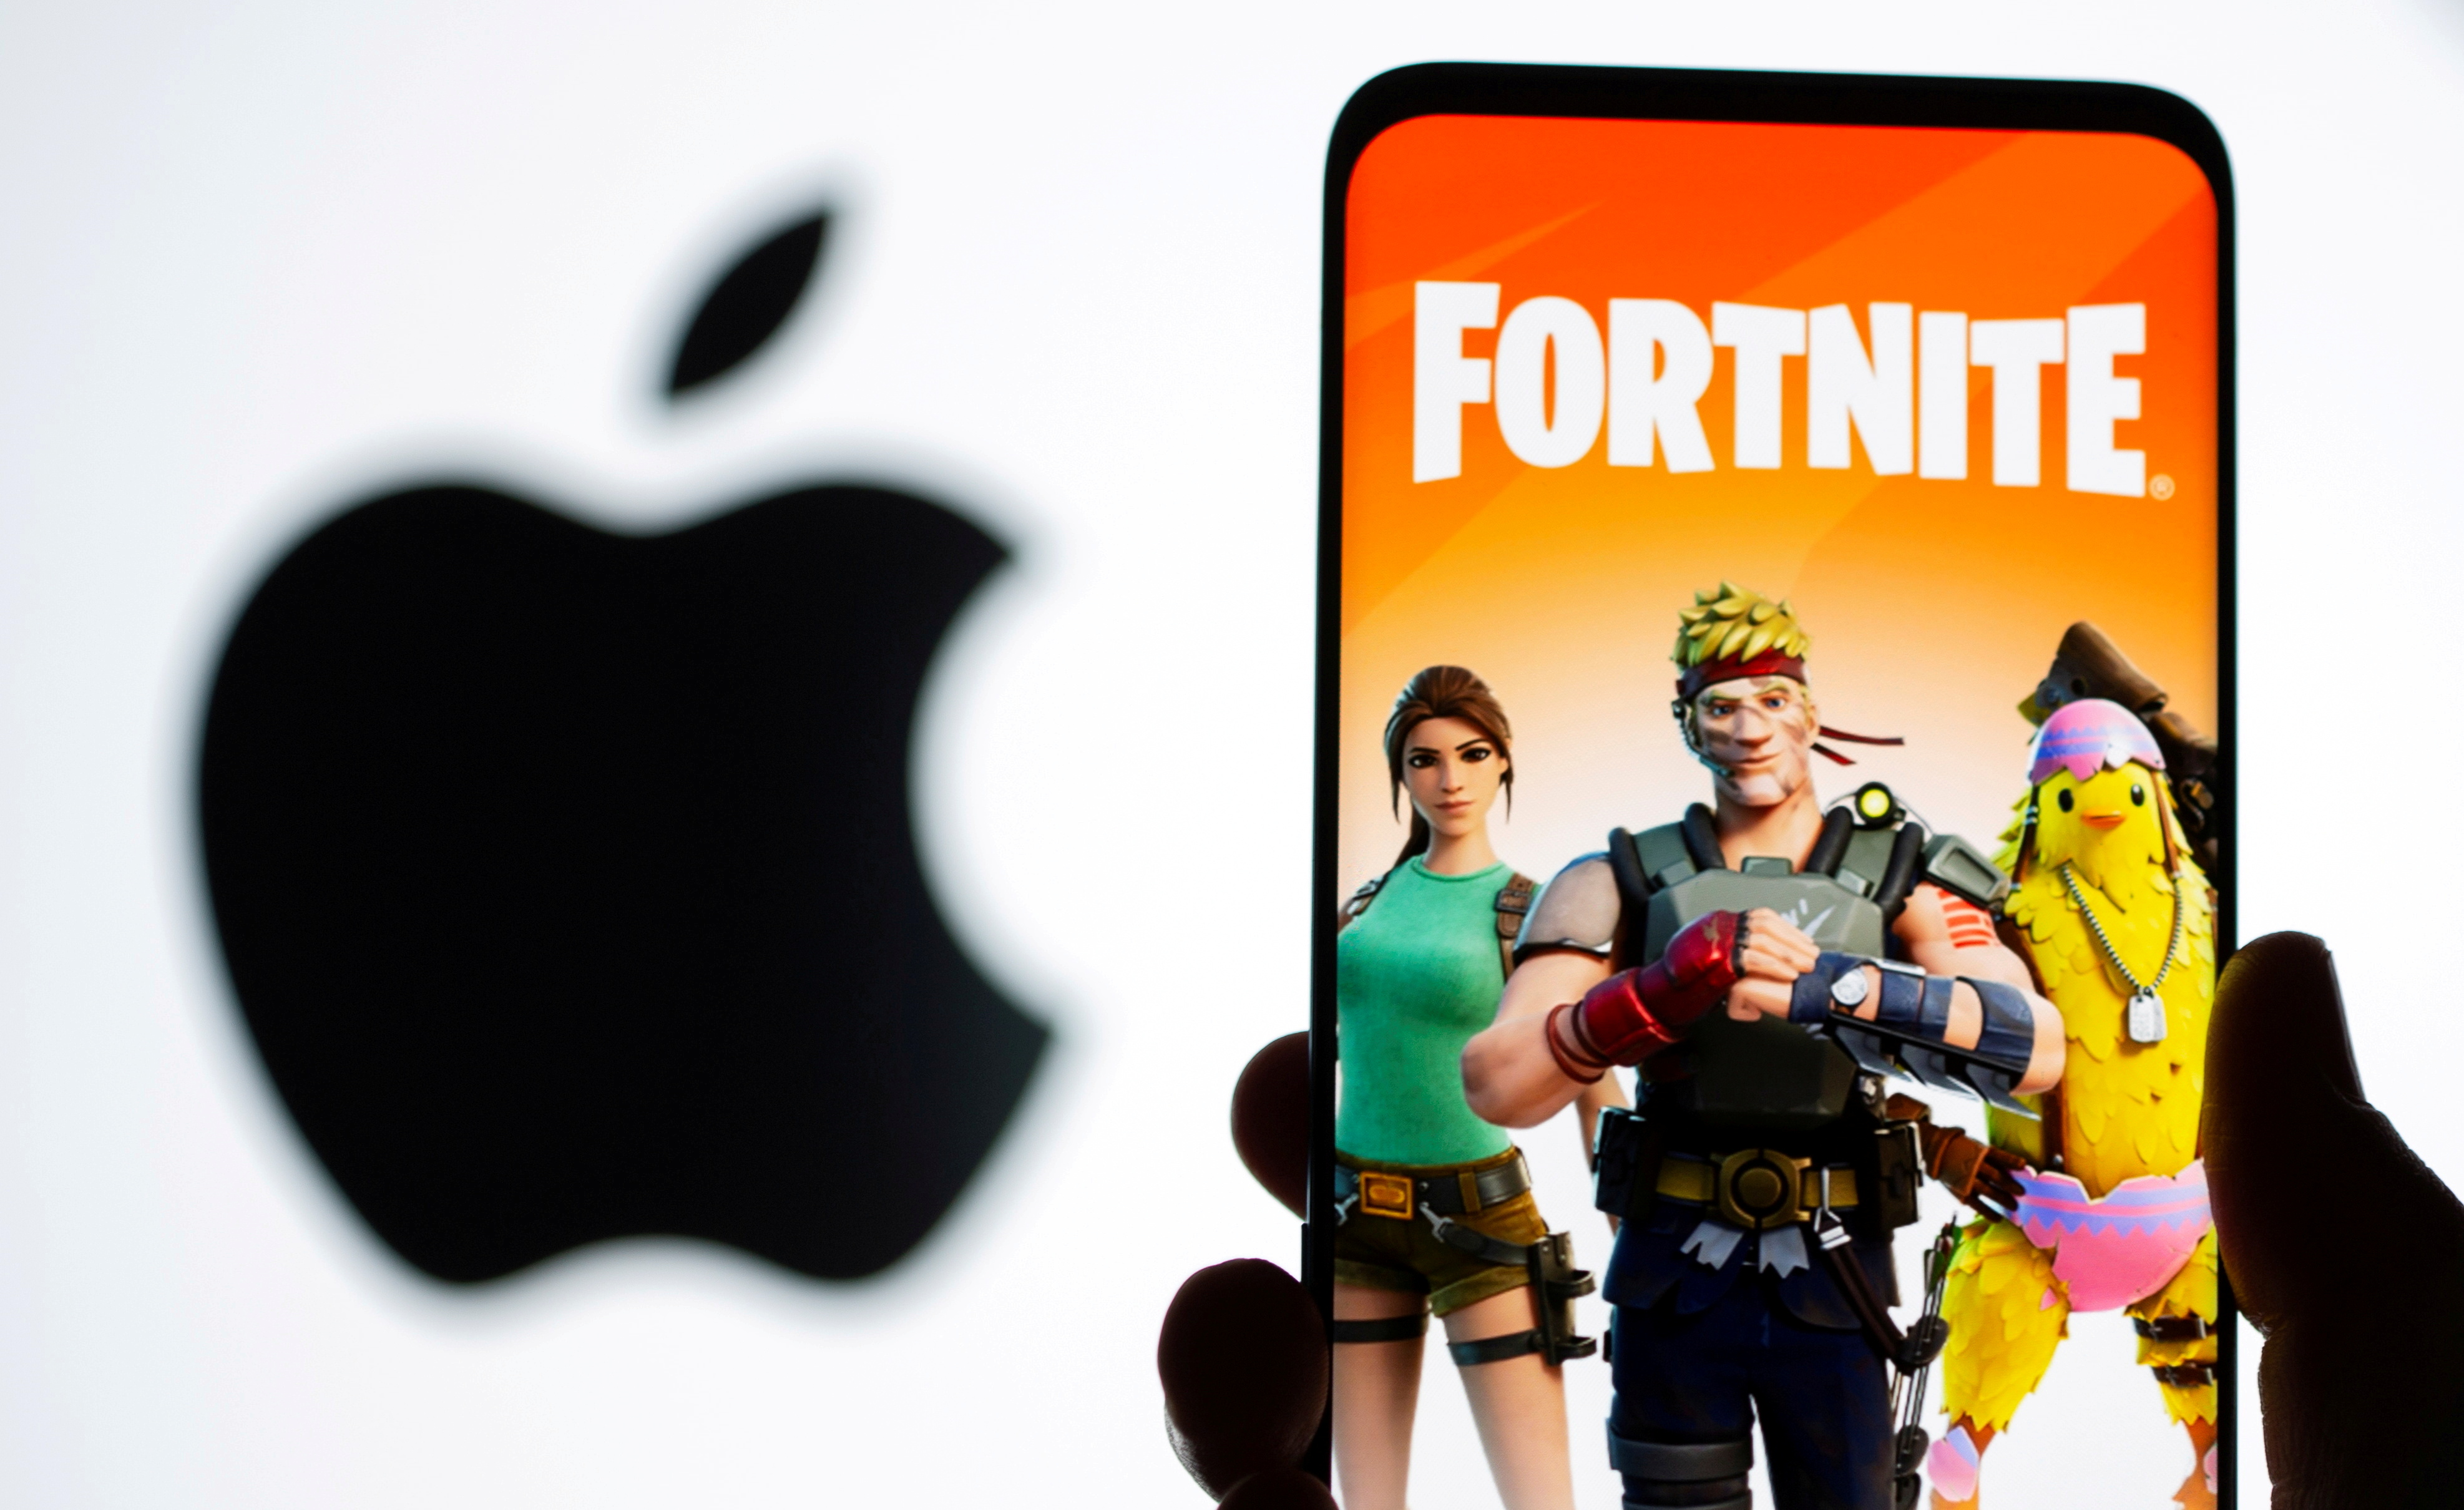 Fortnite graphic and Apple logo displayed in illustration